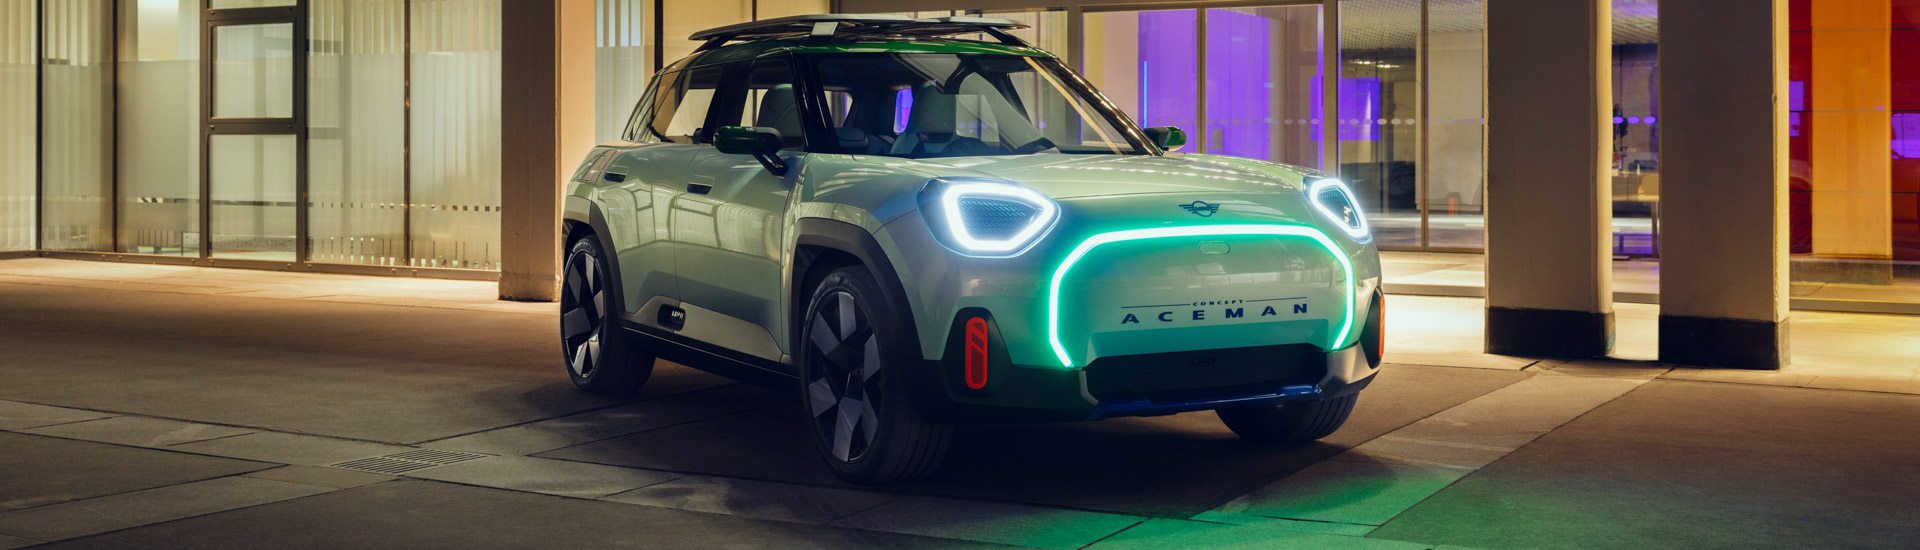 Mini Aceman previews upcoming Chinese-made electric SUV - Chasing Cars